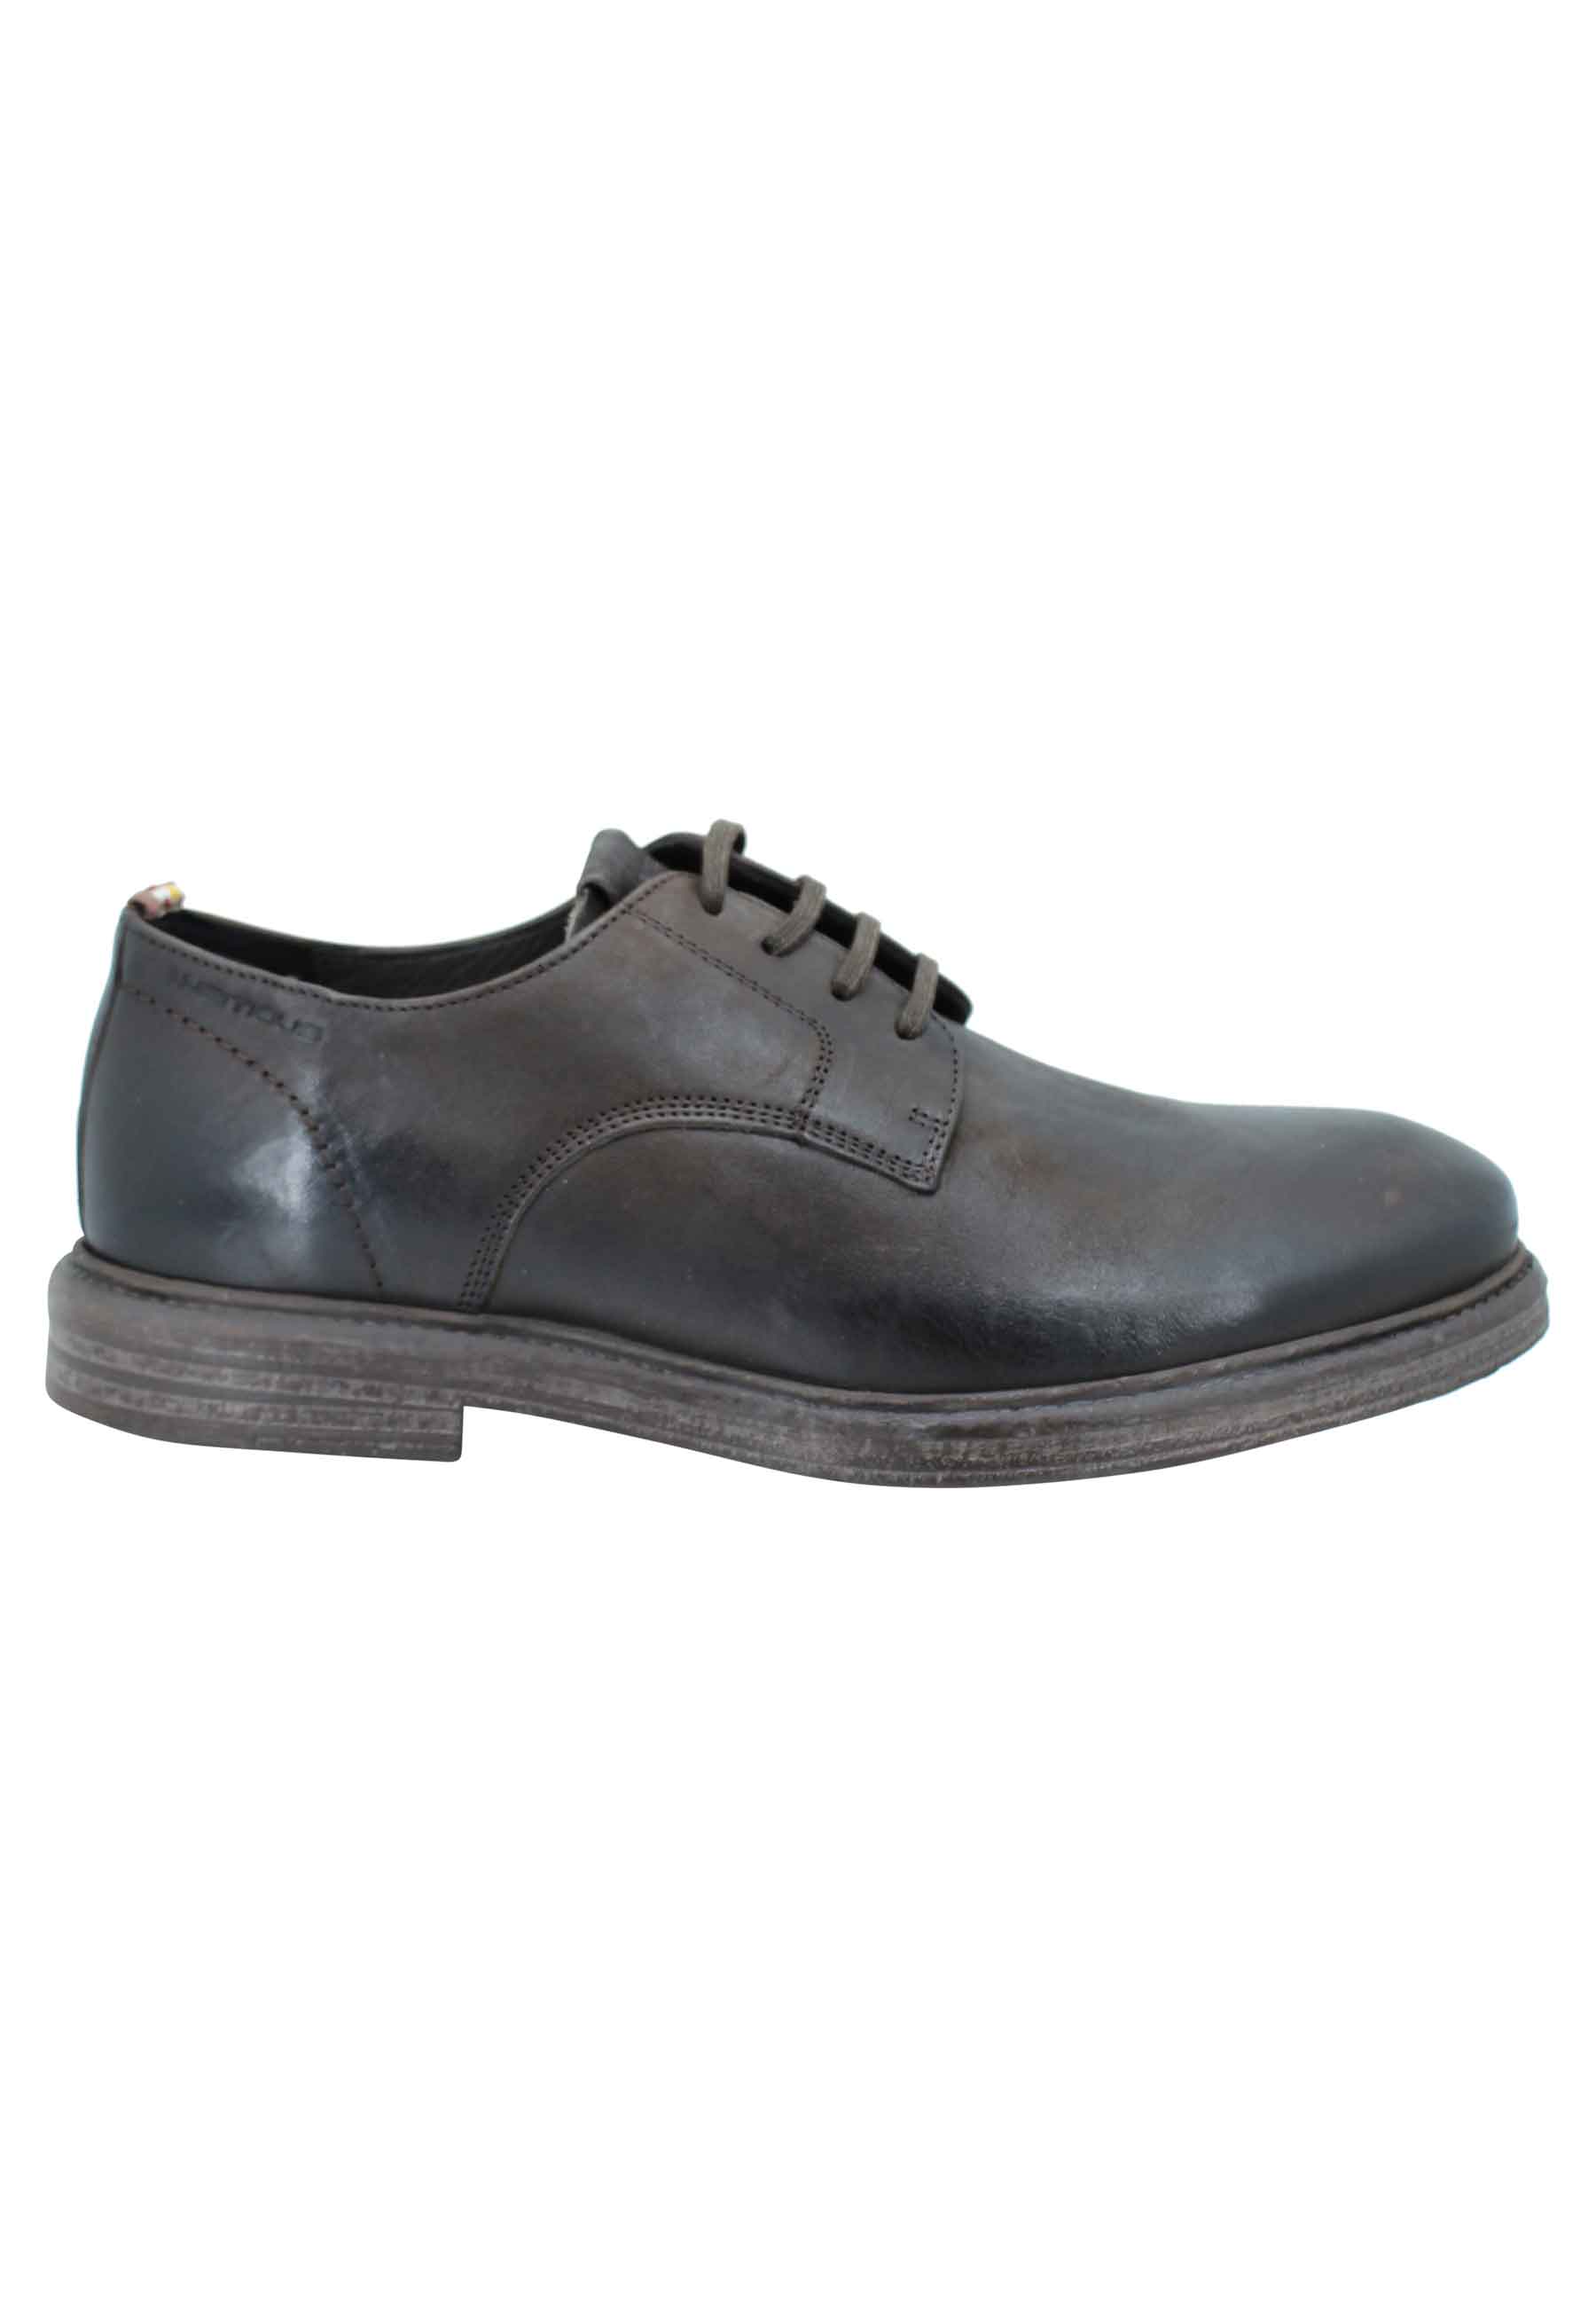 Men's lace-up shoes in brown leather, rubber sole and memory foam insole